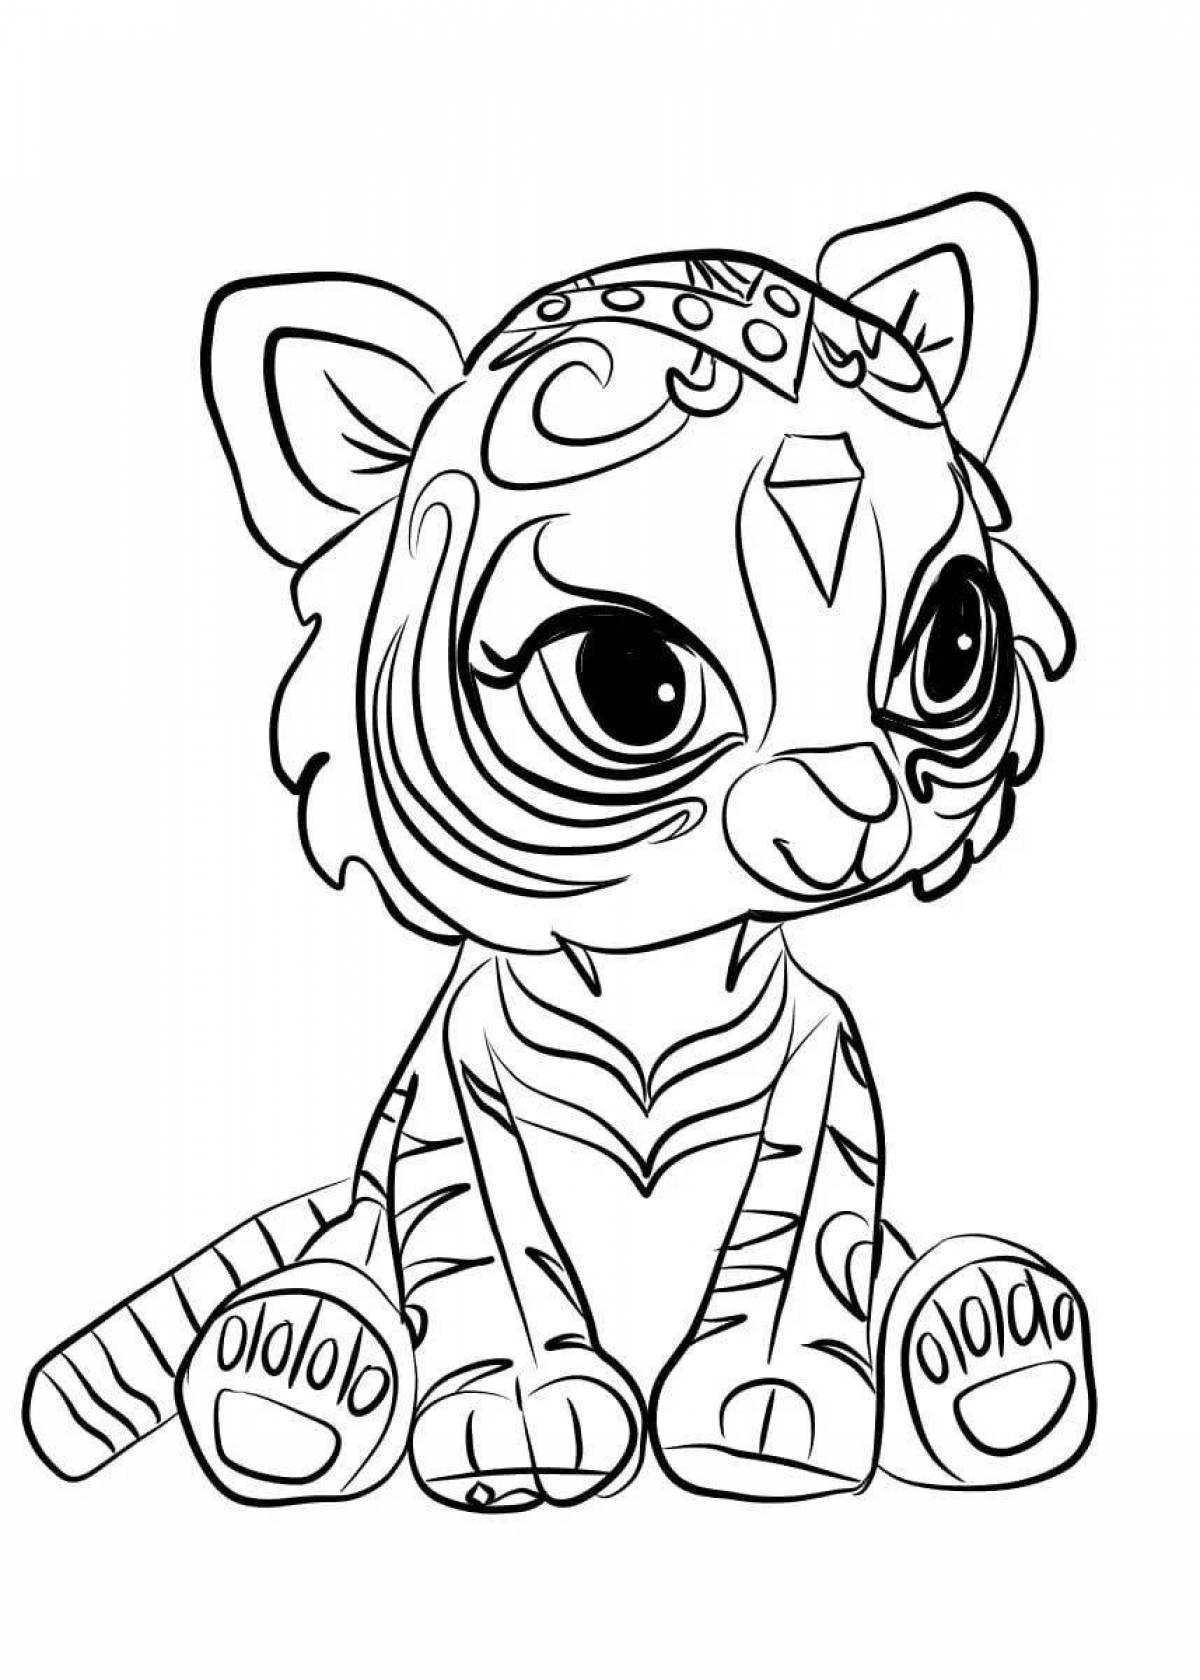 Adorable tiger cub coloring for girls